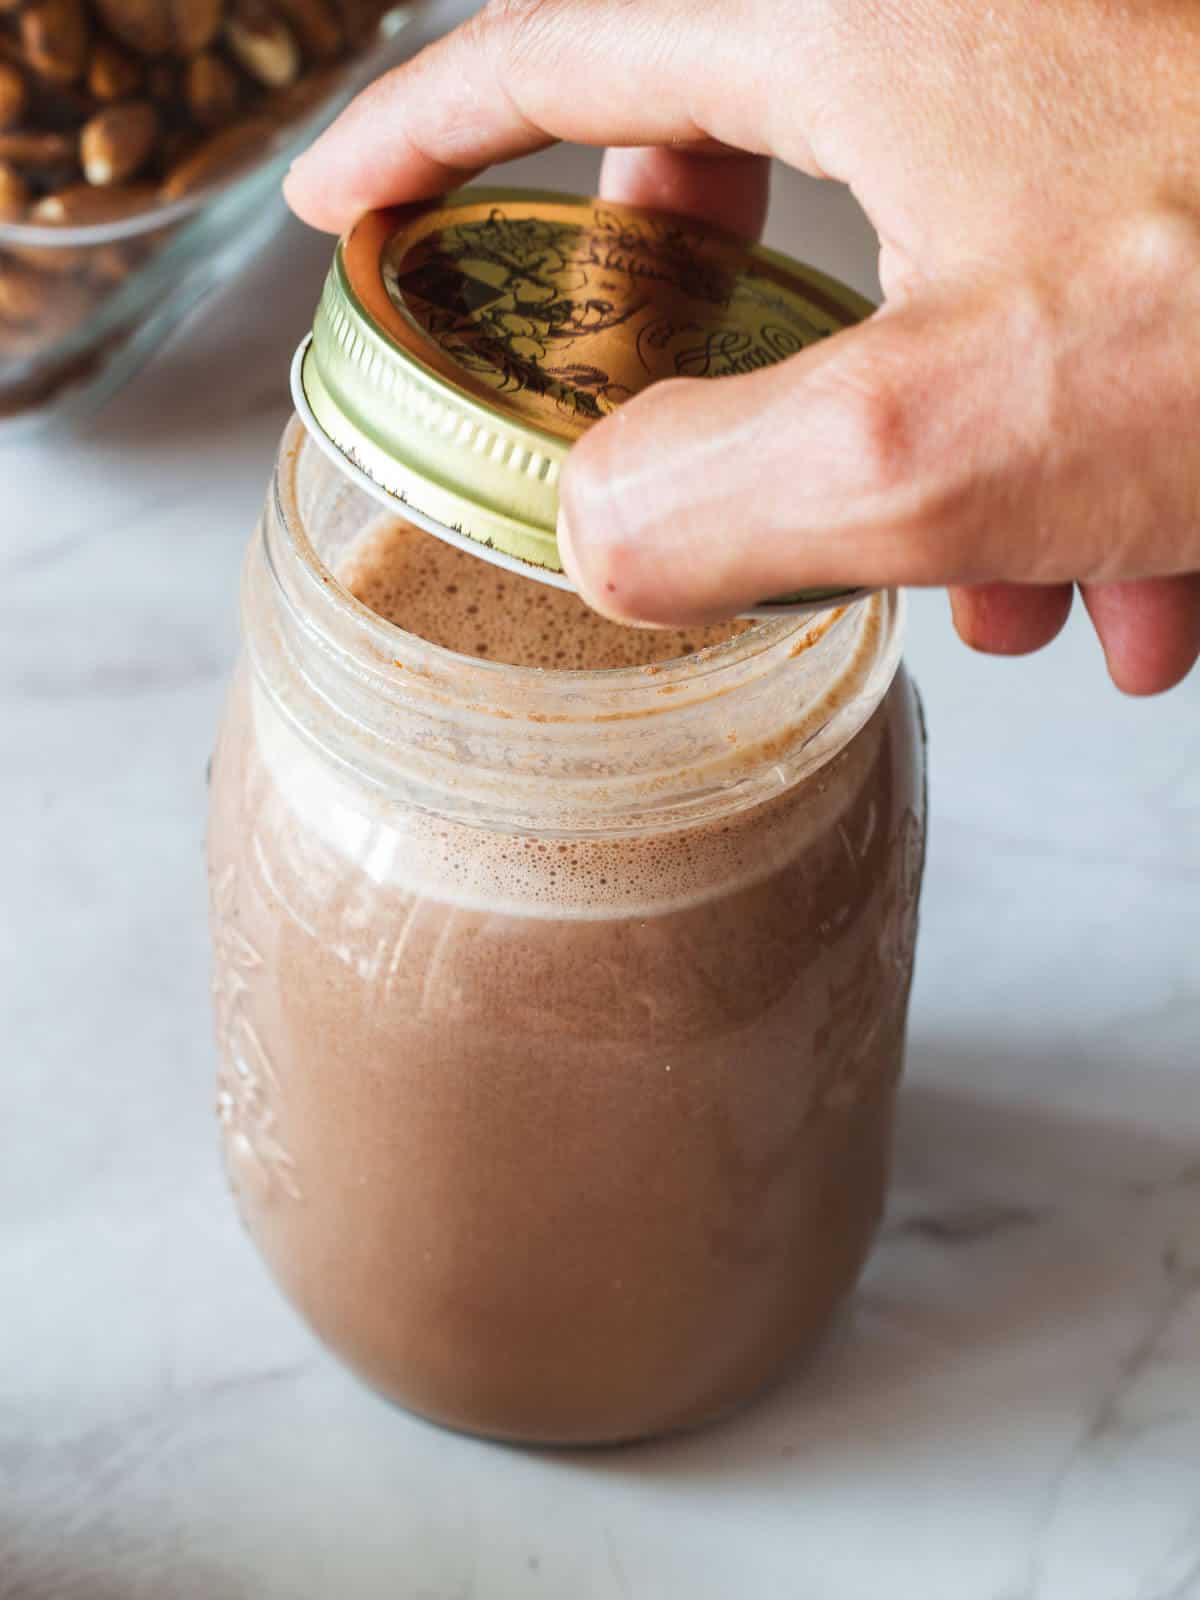 store dairy-free chocolate milk in an airtight container